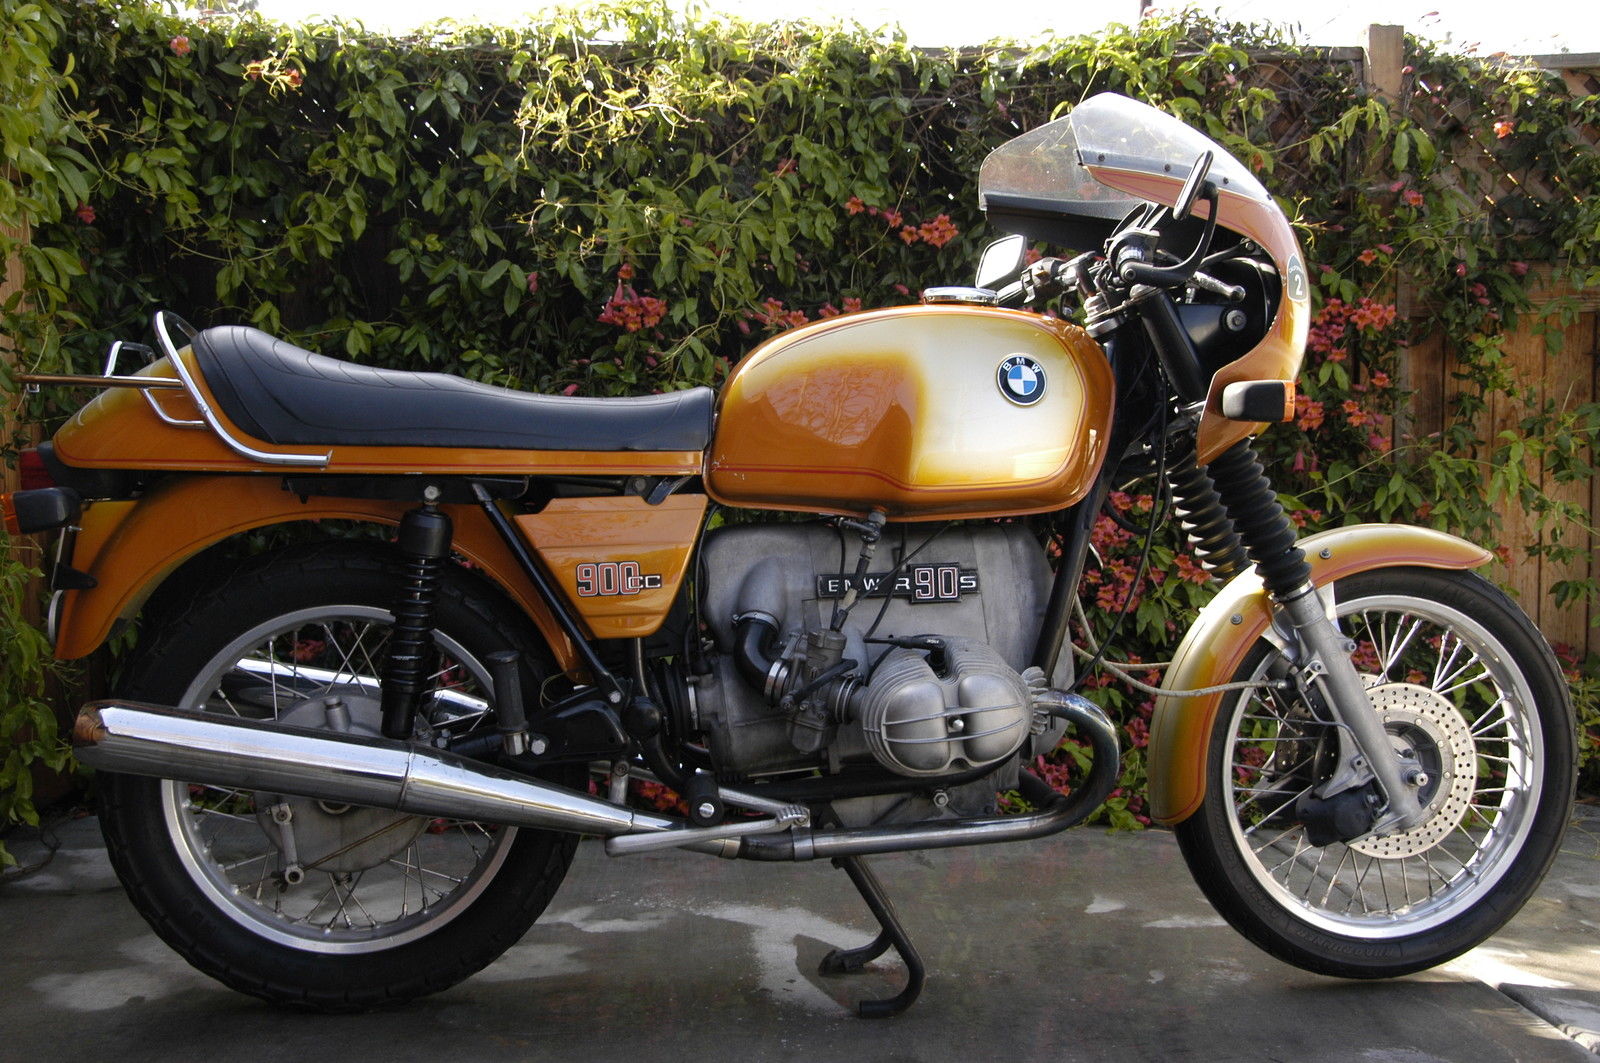 1975 Bmw motorcycle r90s #5